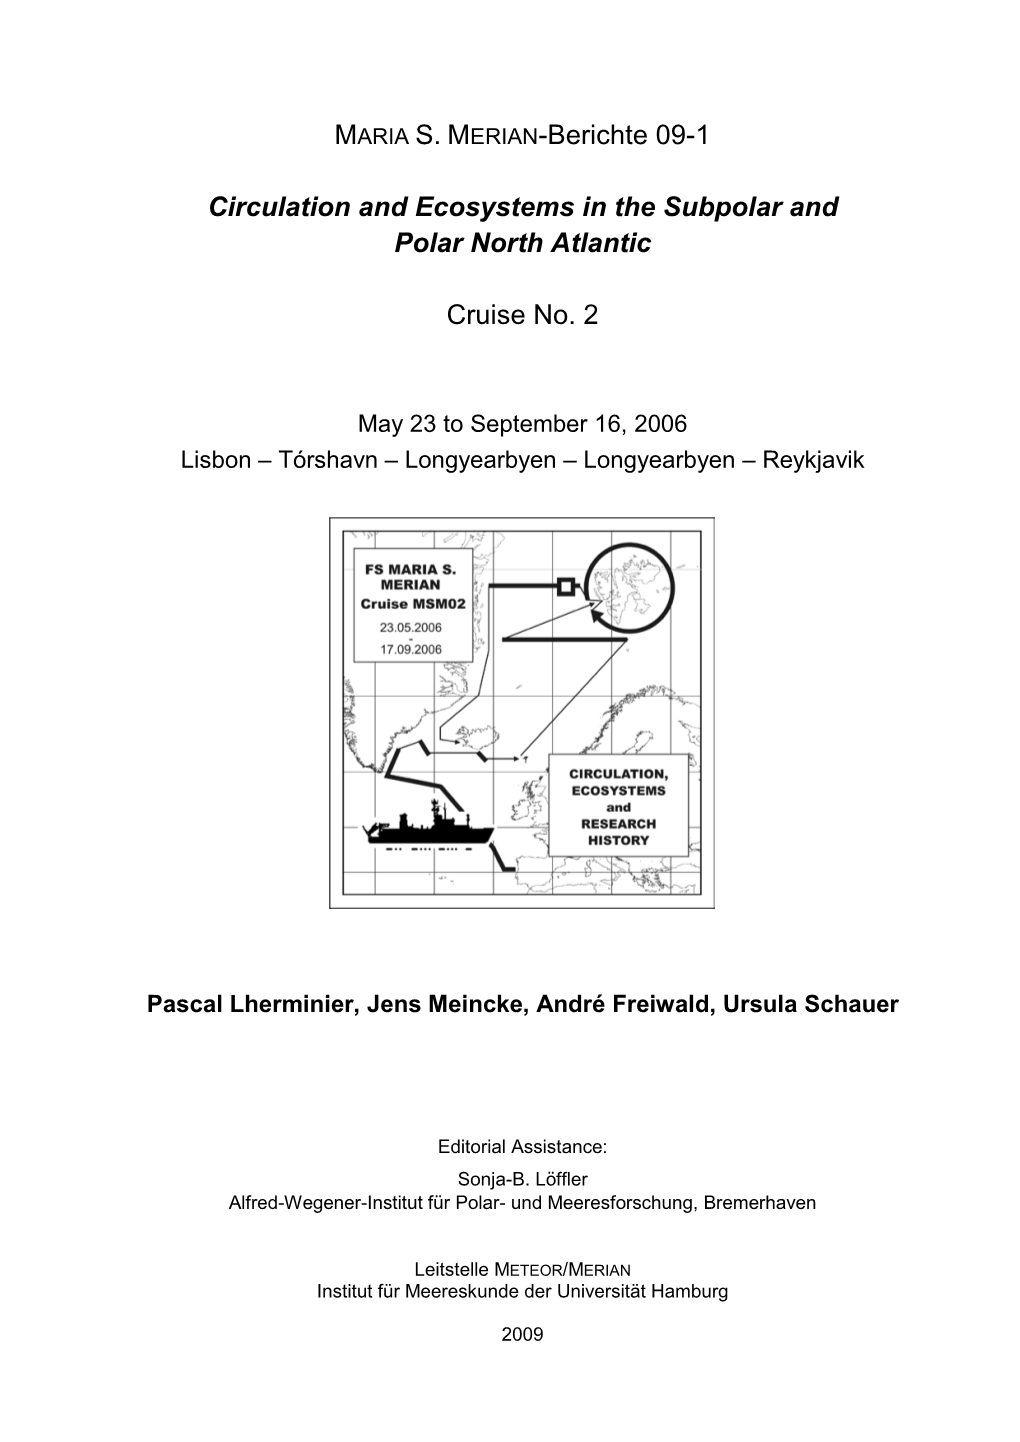 MARIA S. MERIAN-Berichte 09-1 Circulation and Ecosystems in The